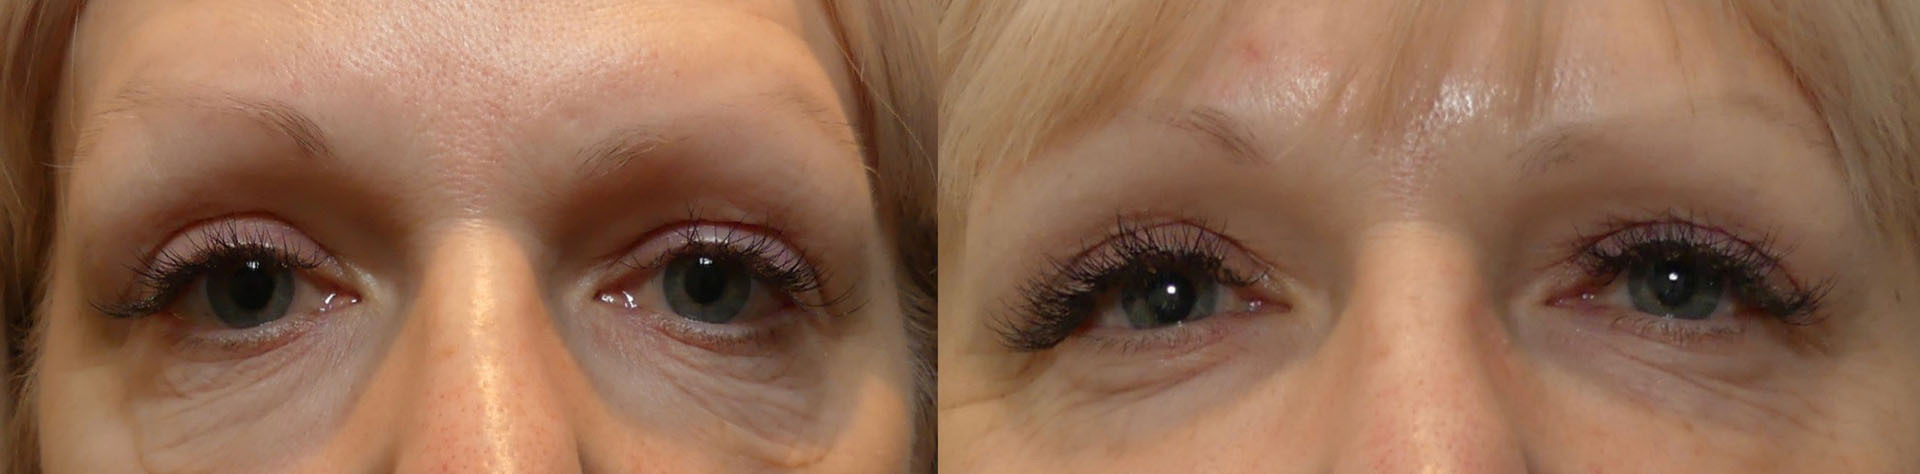 Before and after close-up on eyes